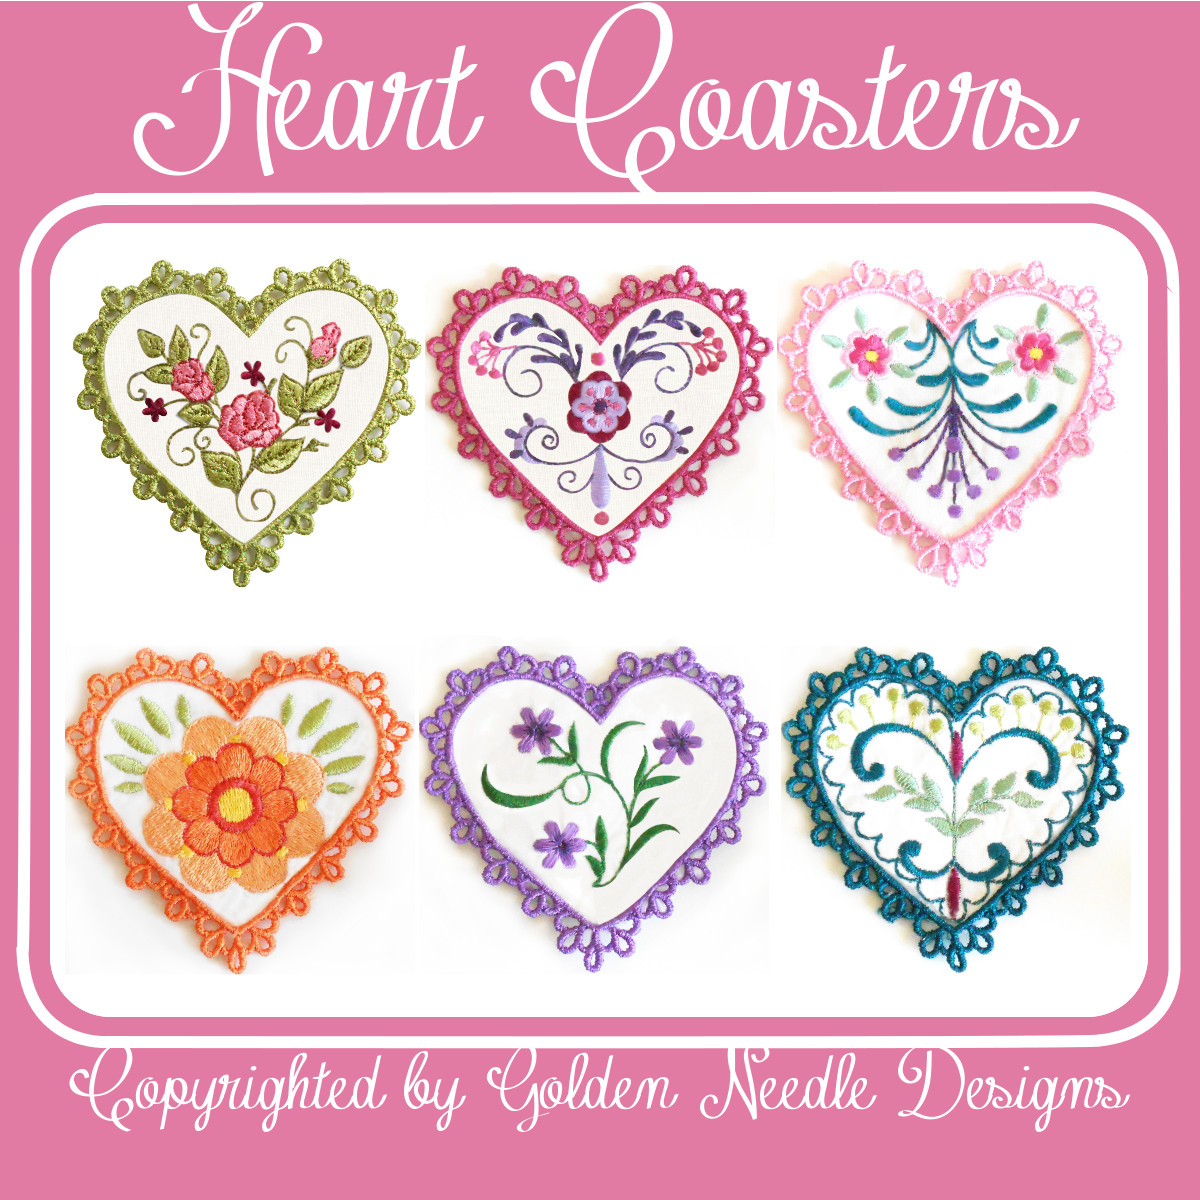 Sewing Machine Embroidery Patterns Heart Coasters Sew In The Hoop Machine Embroidery Designs 1299